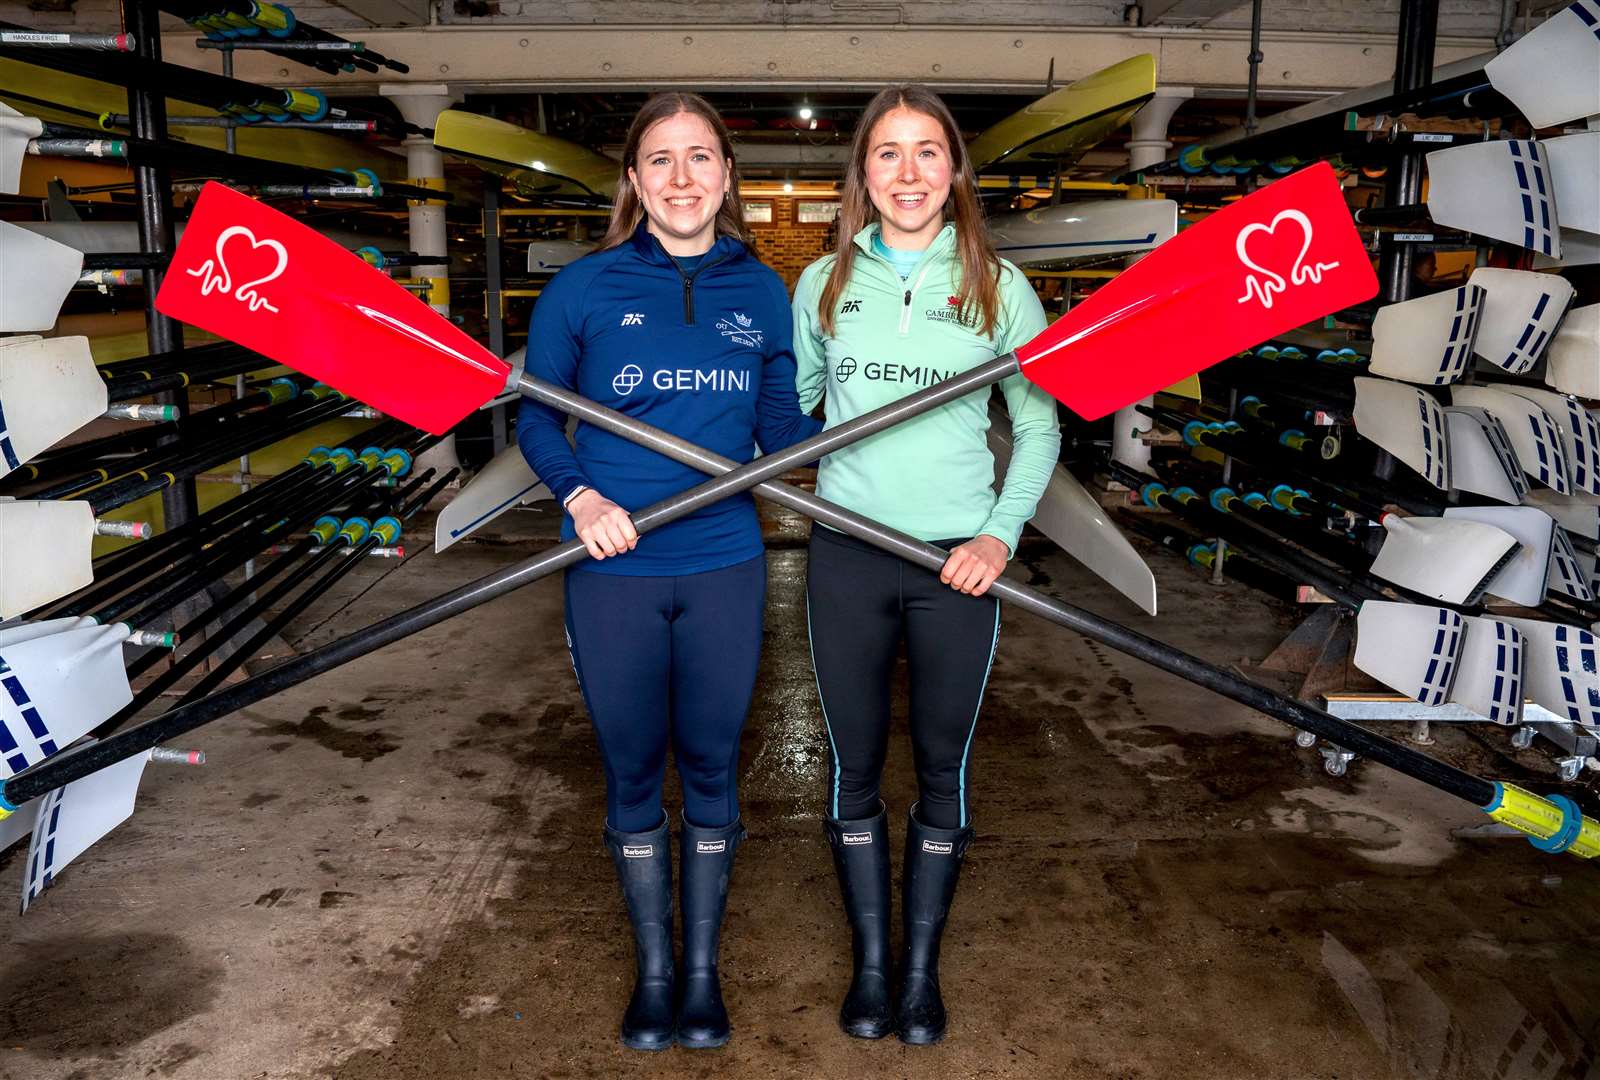 Catherine and Gemma are looking forward to their teams going head-to-head in the Boat Race on March 30 (Tim Bekir/British Heart Foundation/PA)